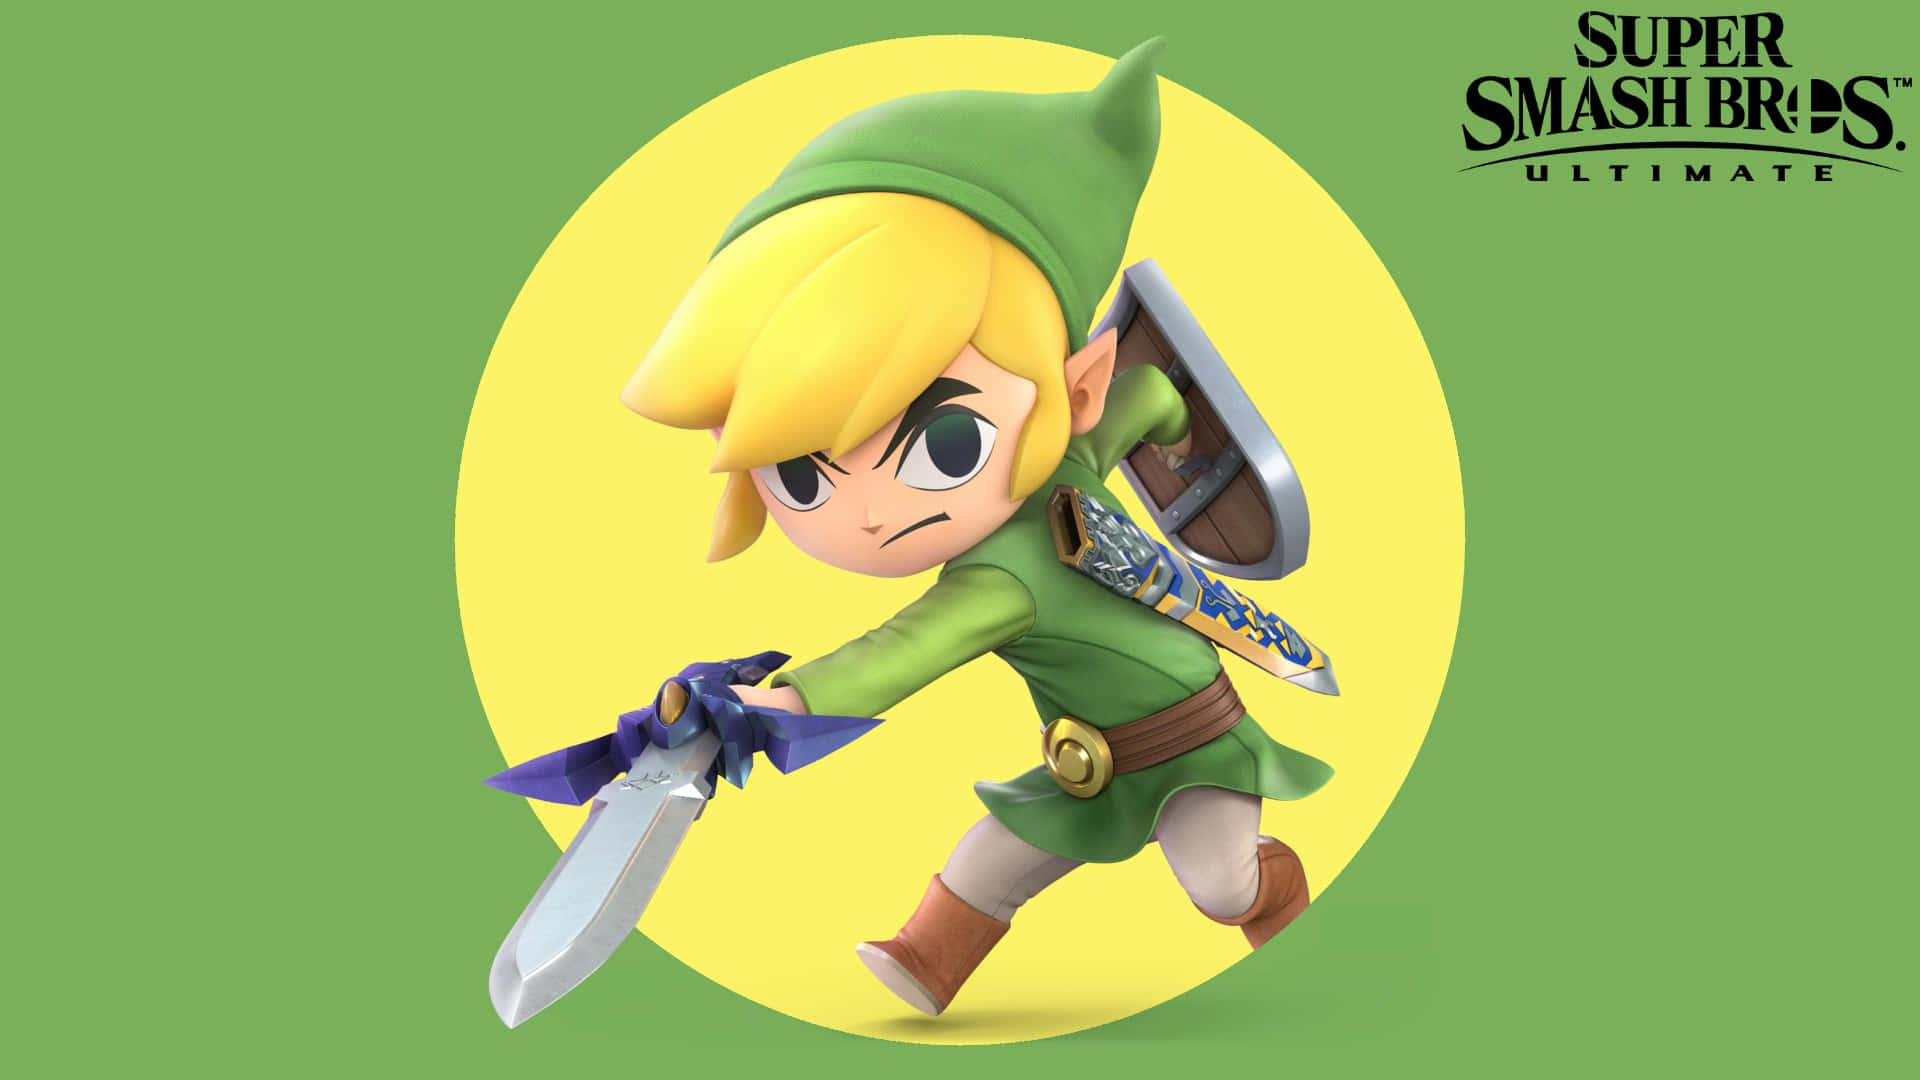 Toon Link In The Super Smash Bros Ultimate Background